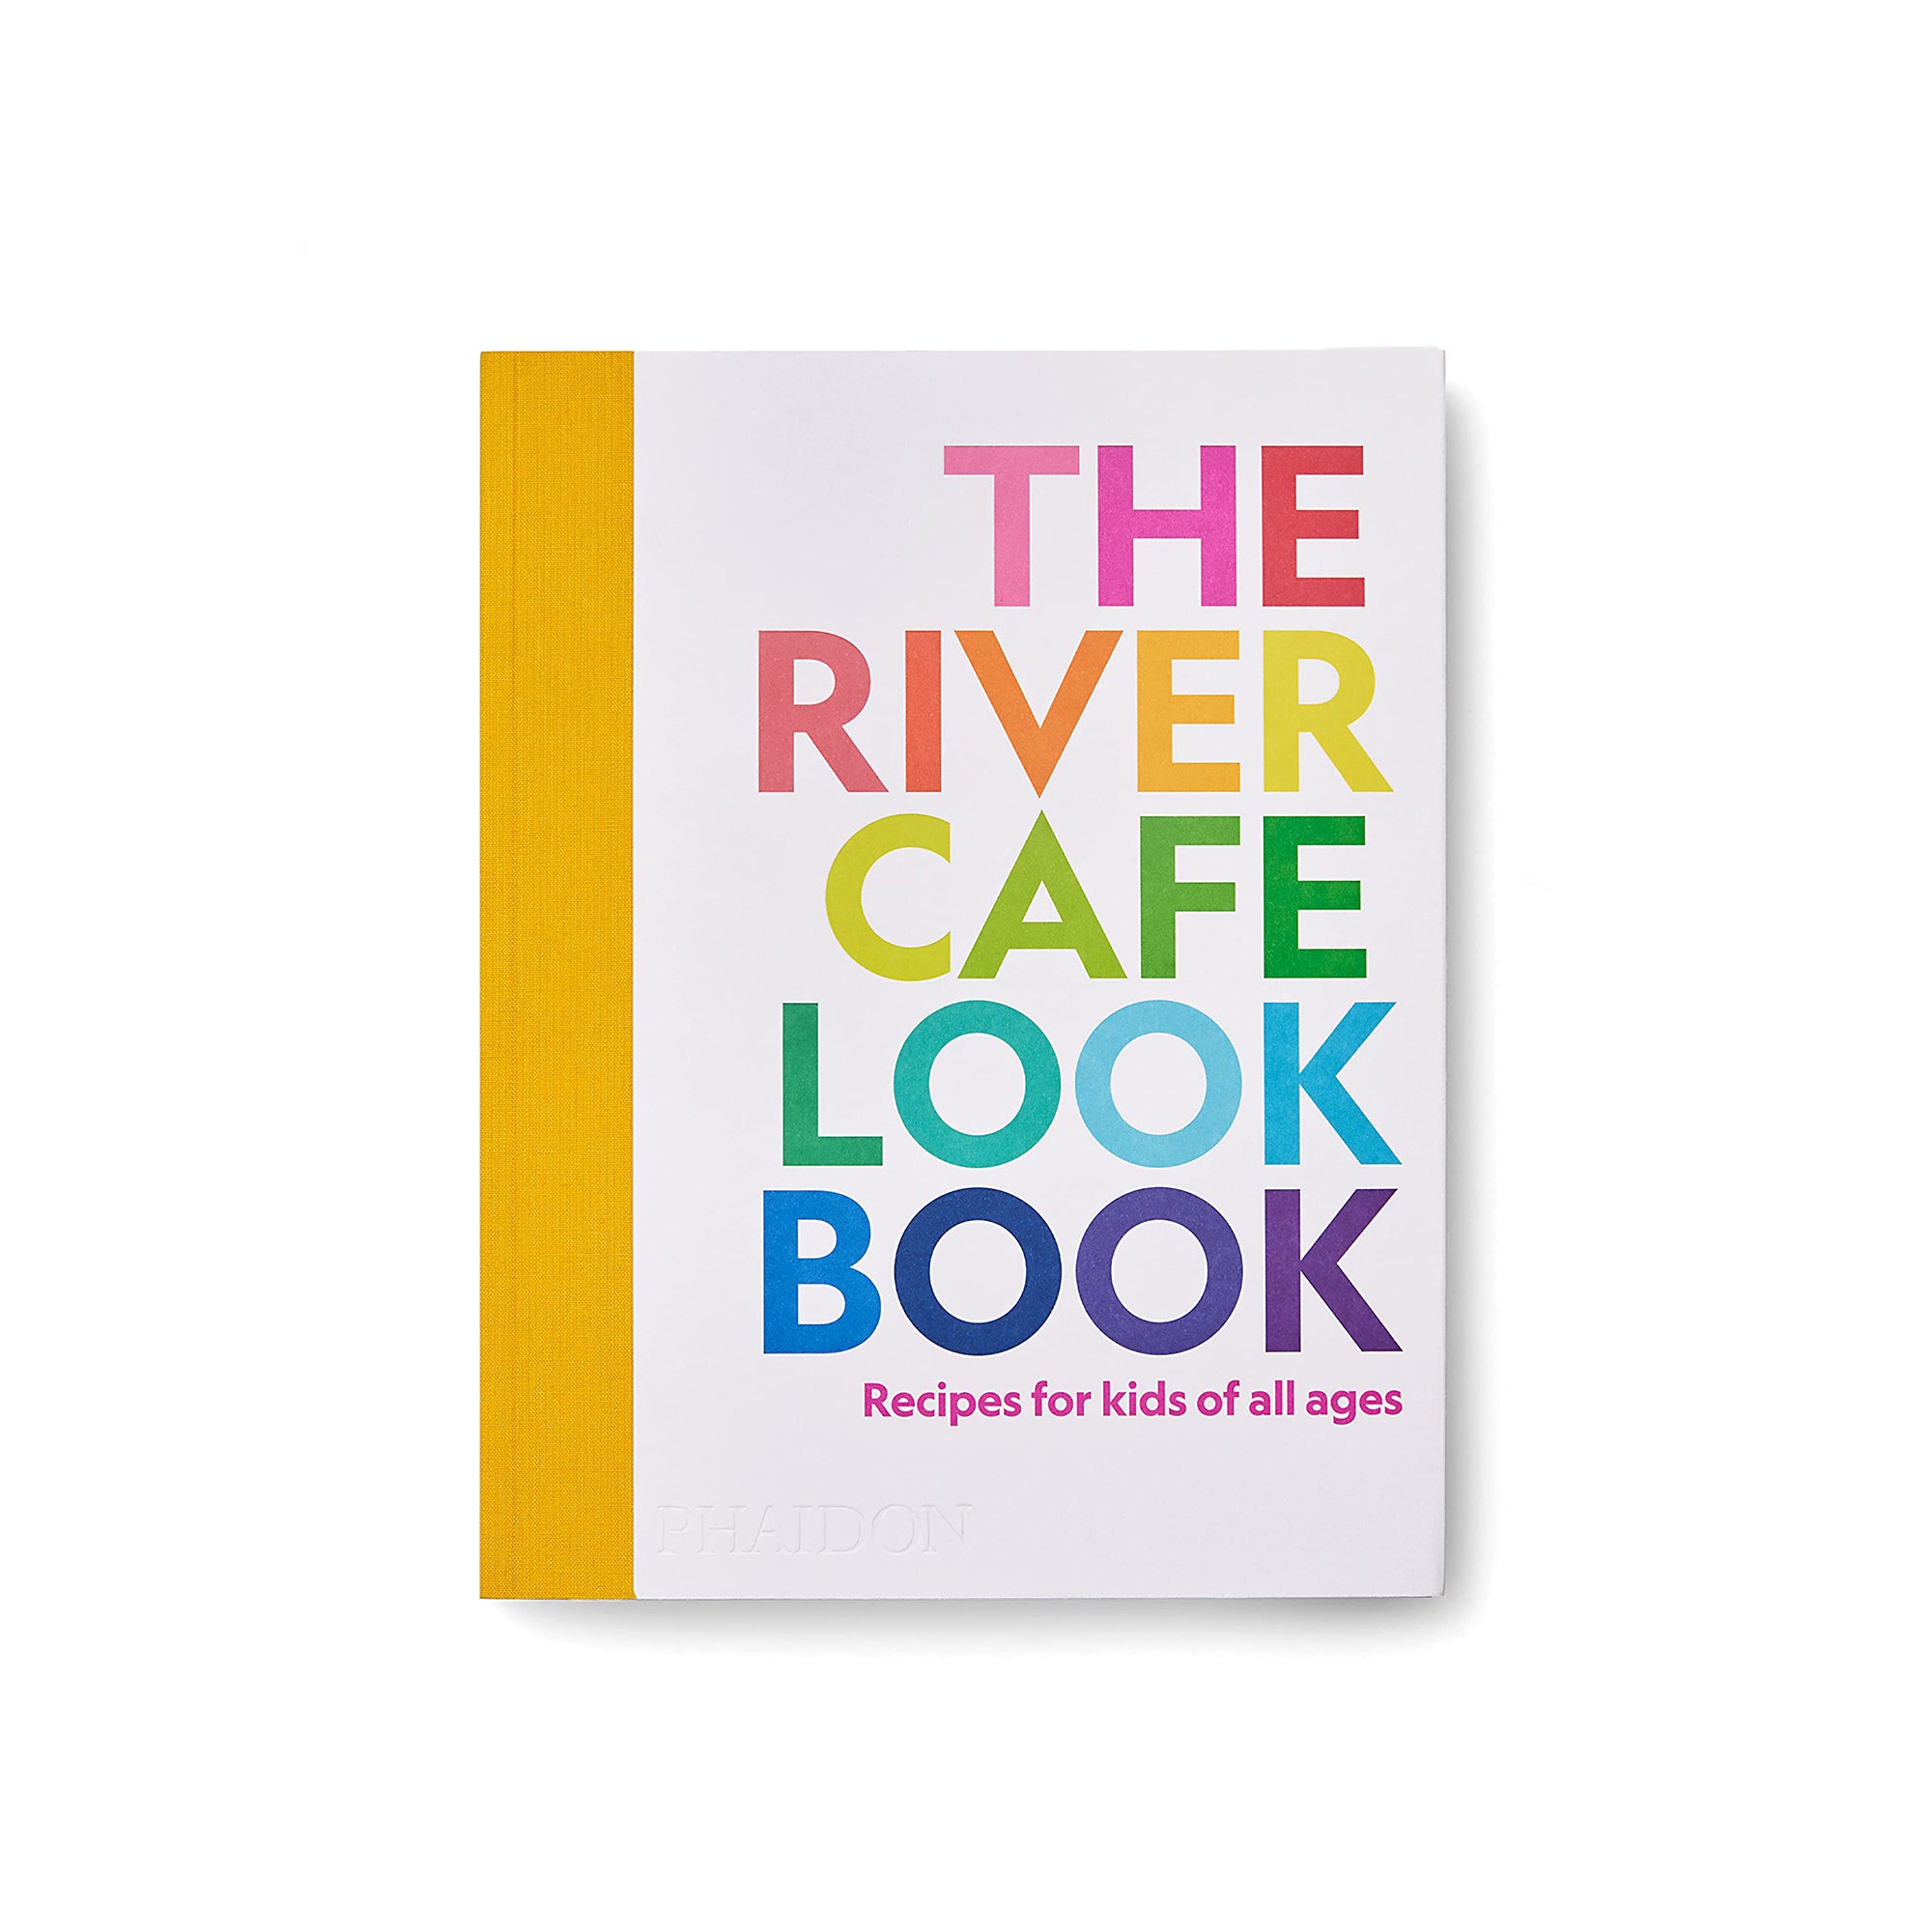 The River Cafe Look Book, Recipes for Kids of All Ages